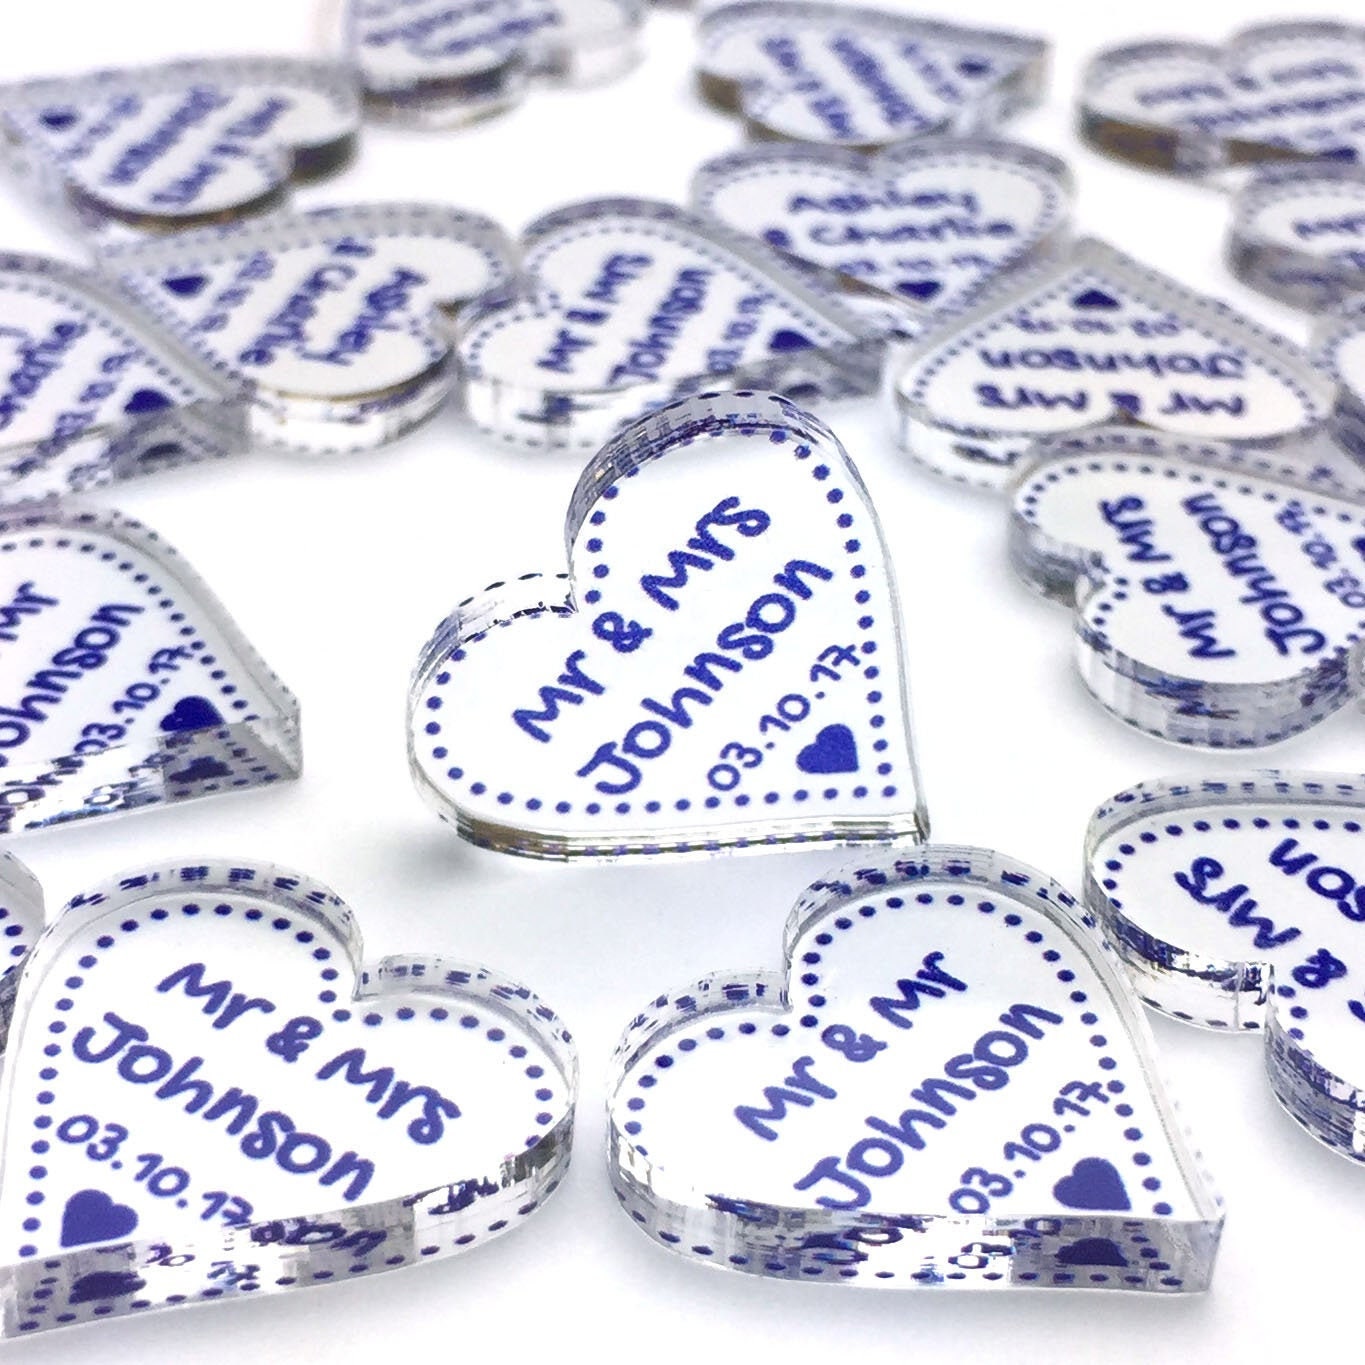 Personalised BLUE 3cm Acrylic Heart Wedding Favours Table Decorations Vintage 